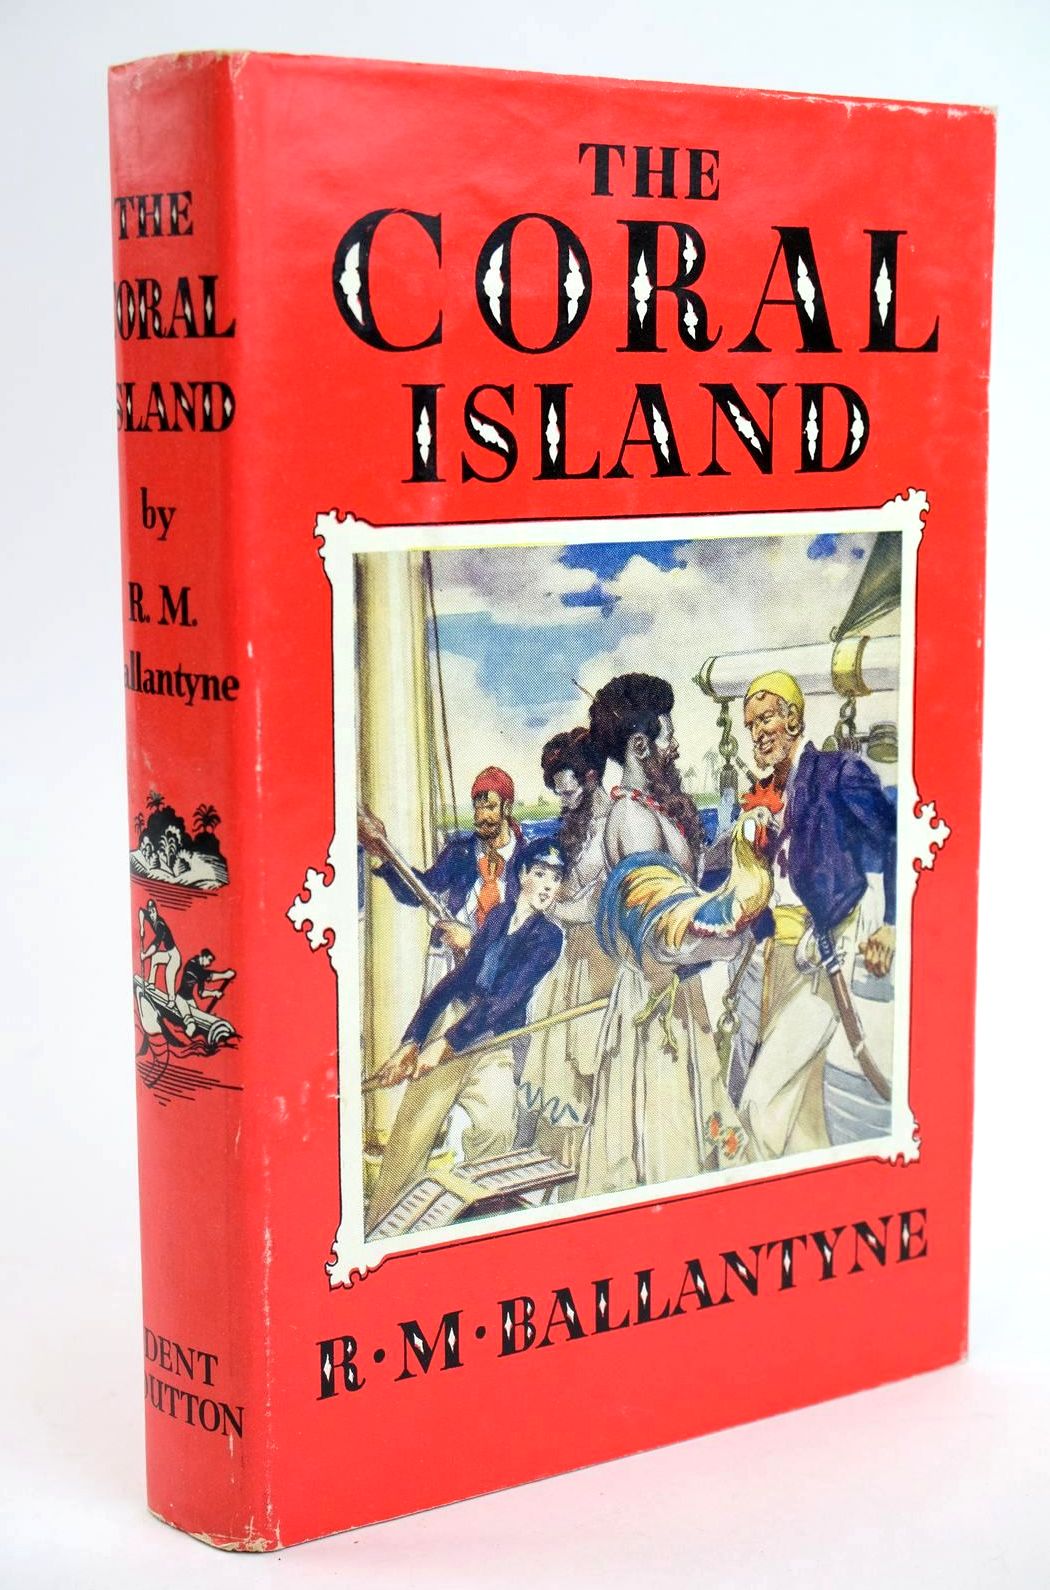 Photo of THE CORAL ISLAND written by Ballantyne, R.M. illustrated by Bates, Leo published by J.M. Dent & Sons Ltd., E.P. Dutton & Co. Inc. (STOCK CODE: 1319252)  for sale by Stella & Rose's Books